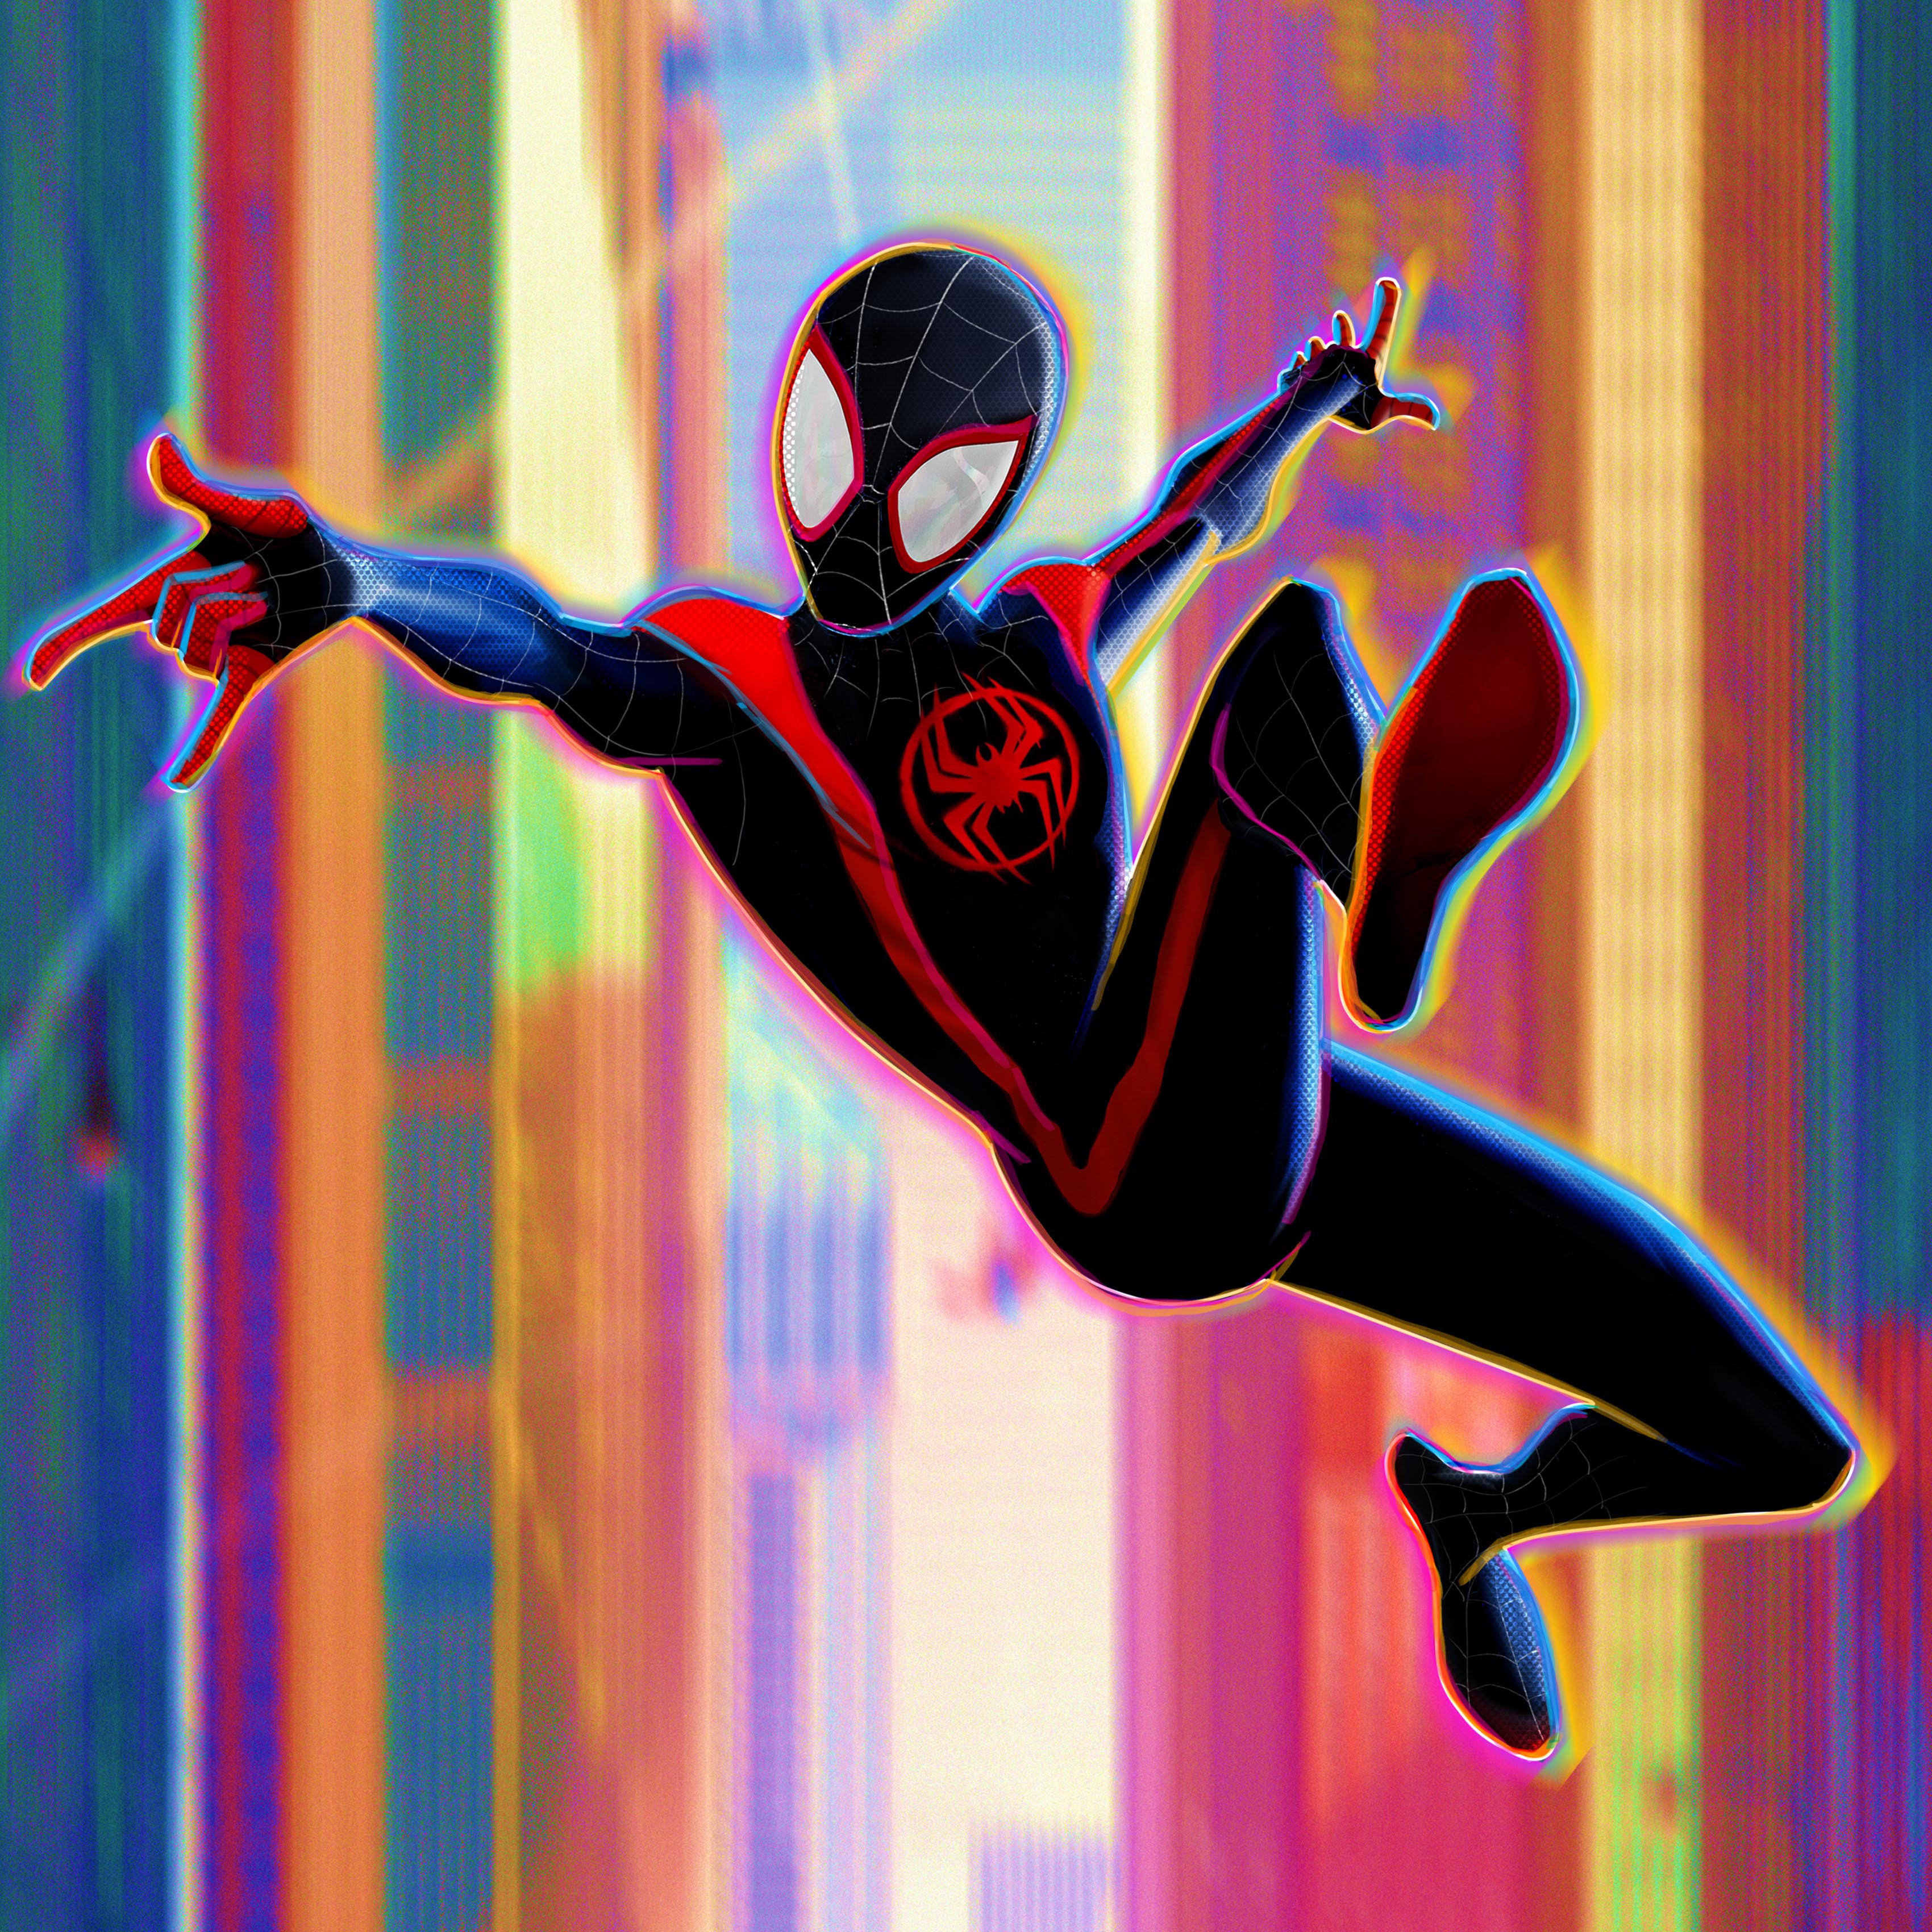 Spider-Man Across the Spider-Verse [2023] (3) by KahlanAmnelle on